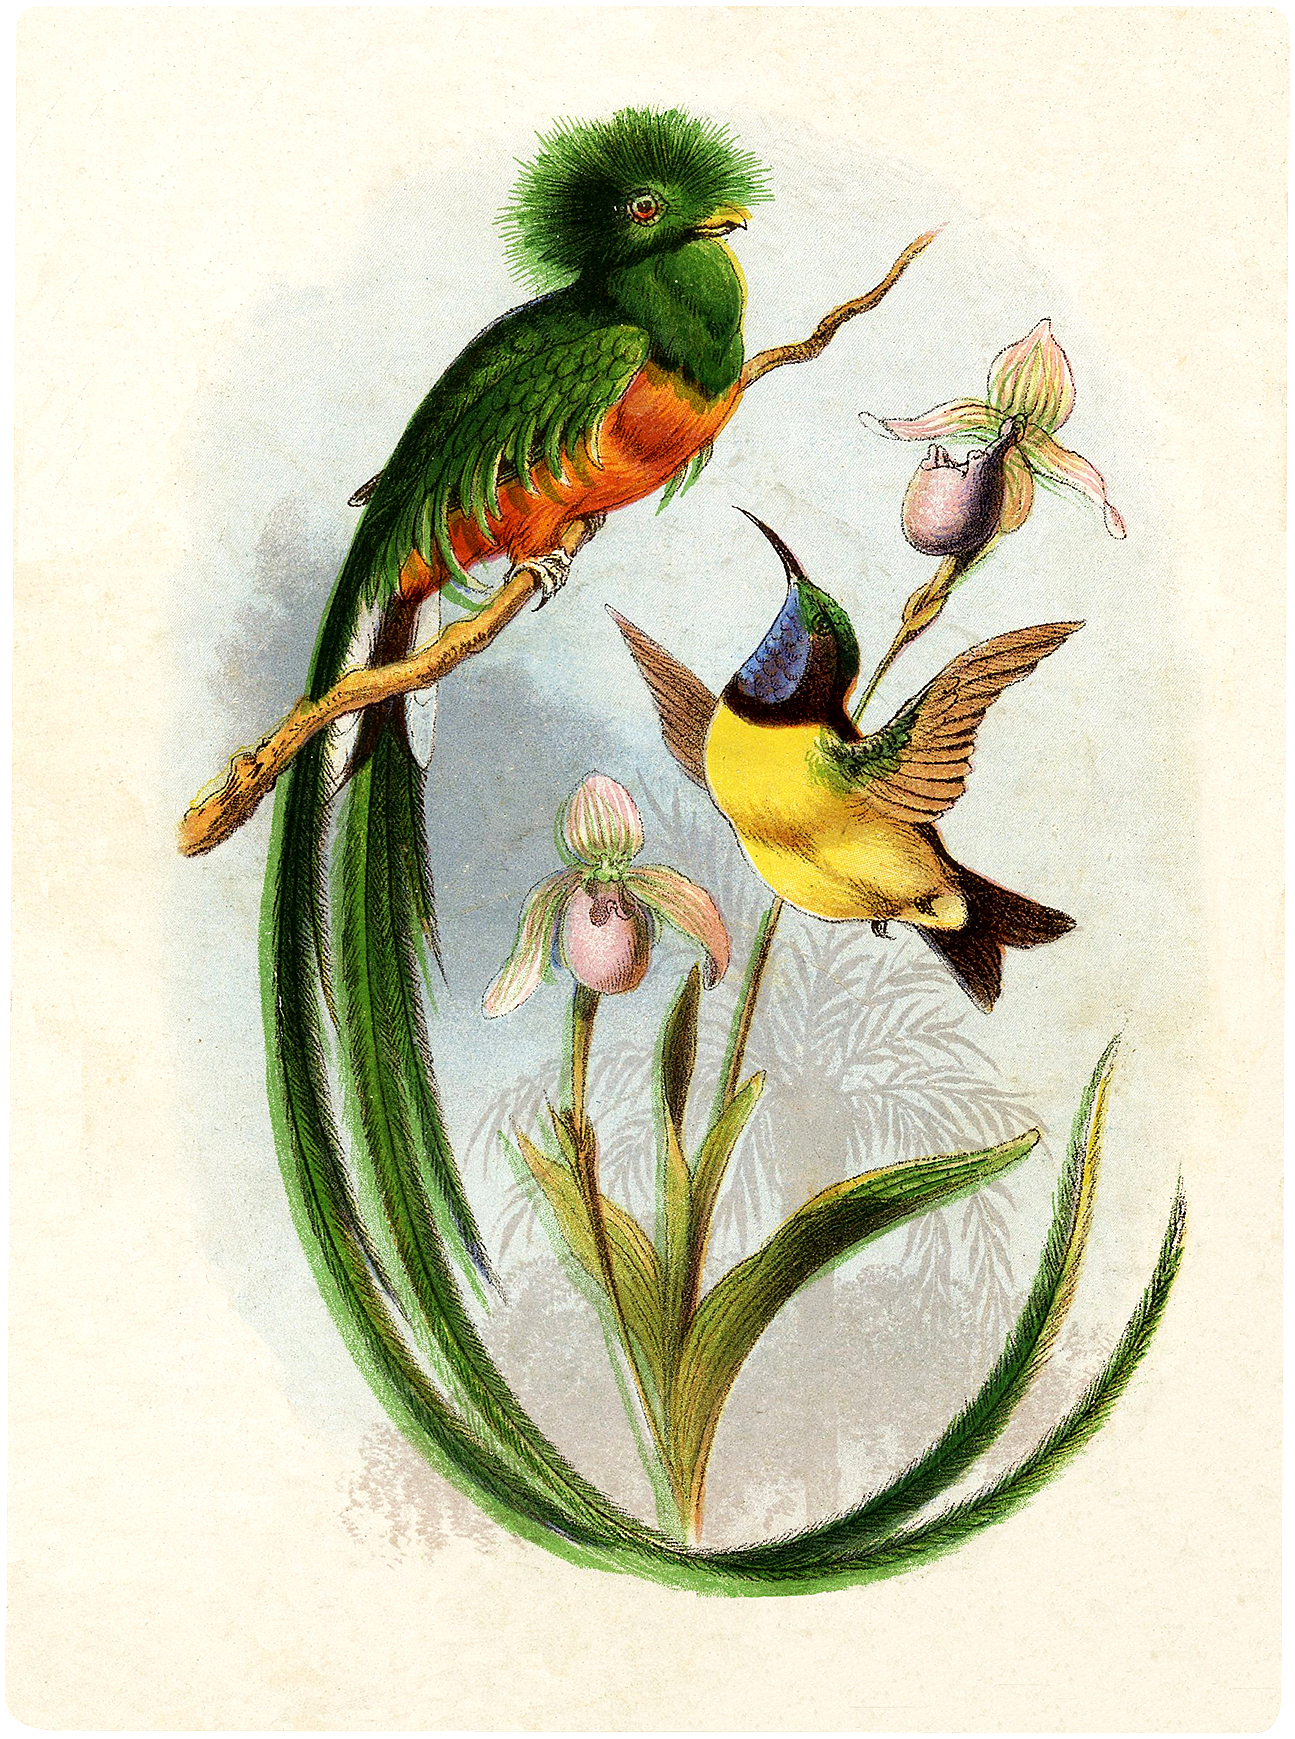 Vintage Tropical Birds Image! - The Graphics Fairy